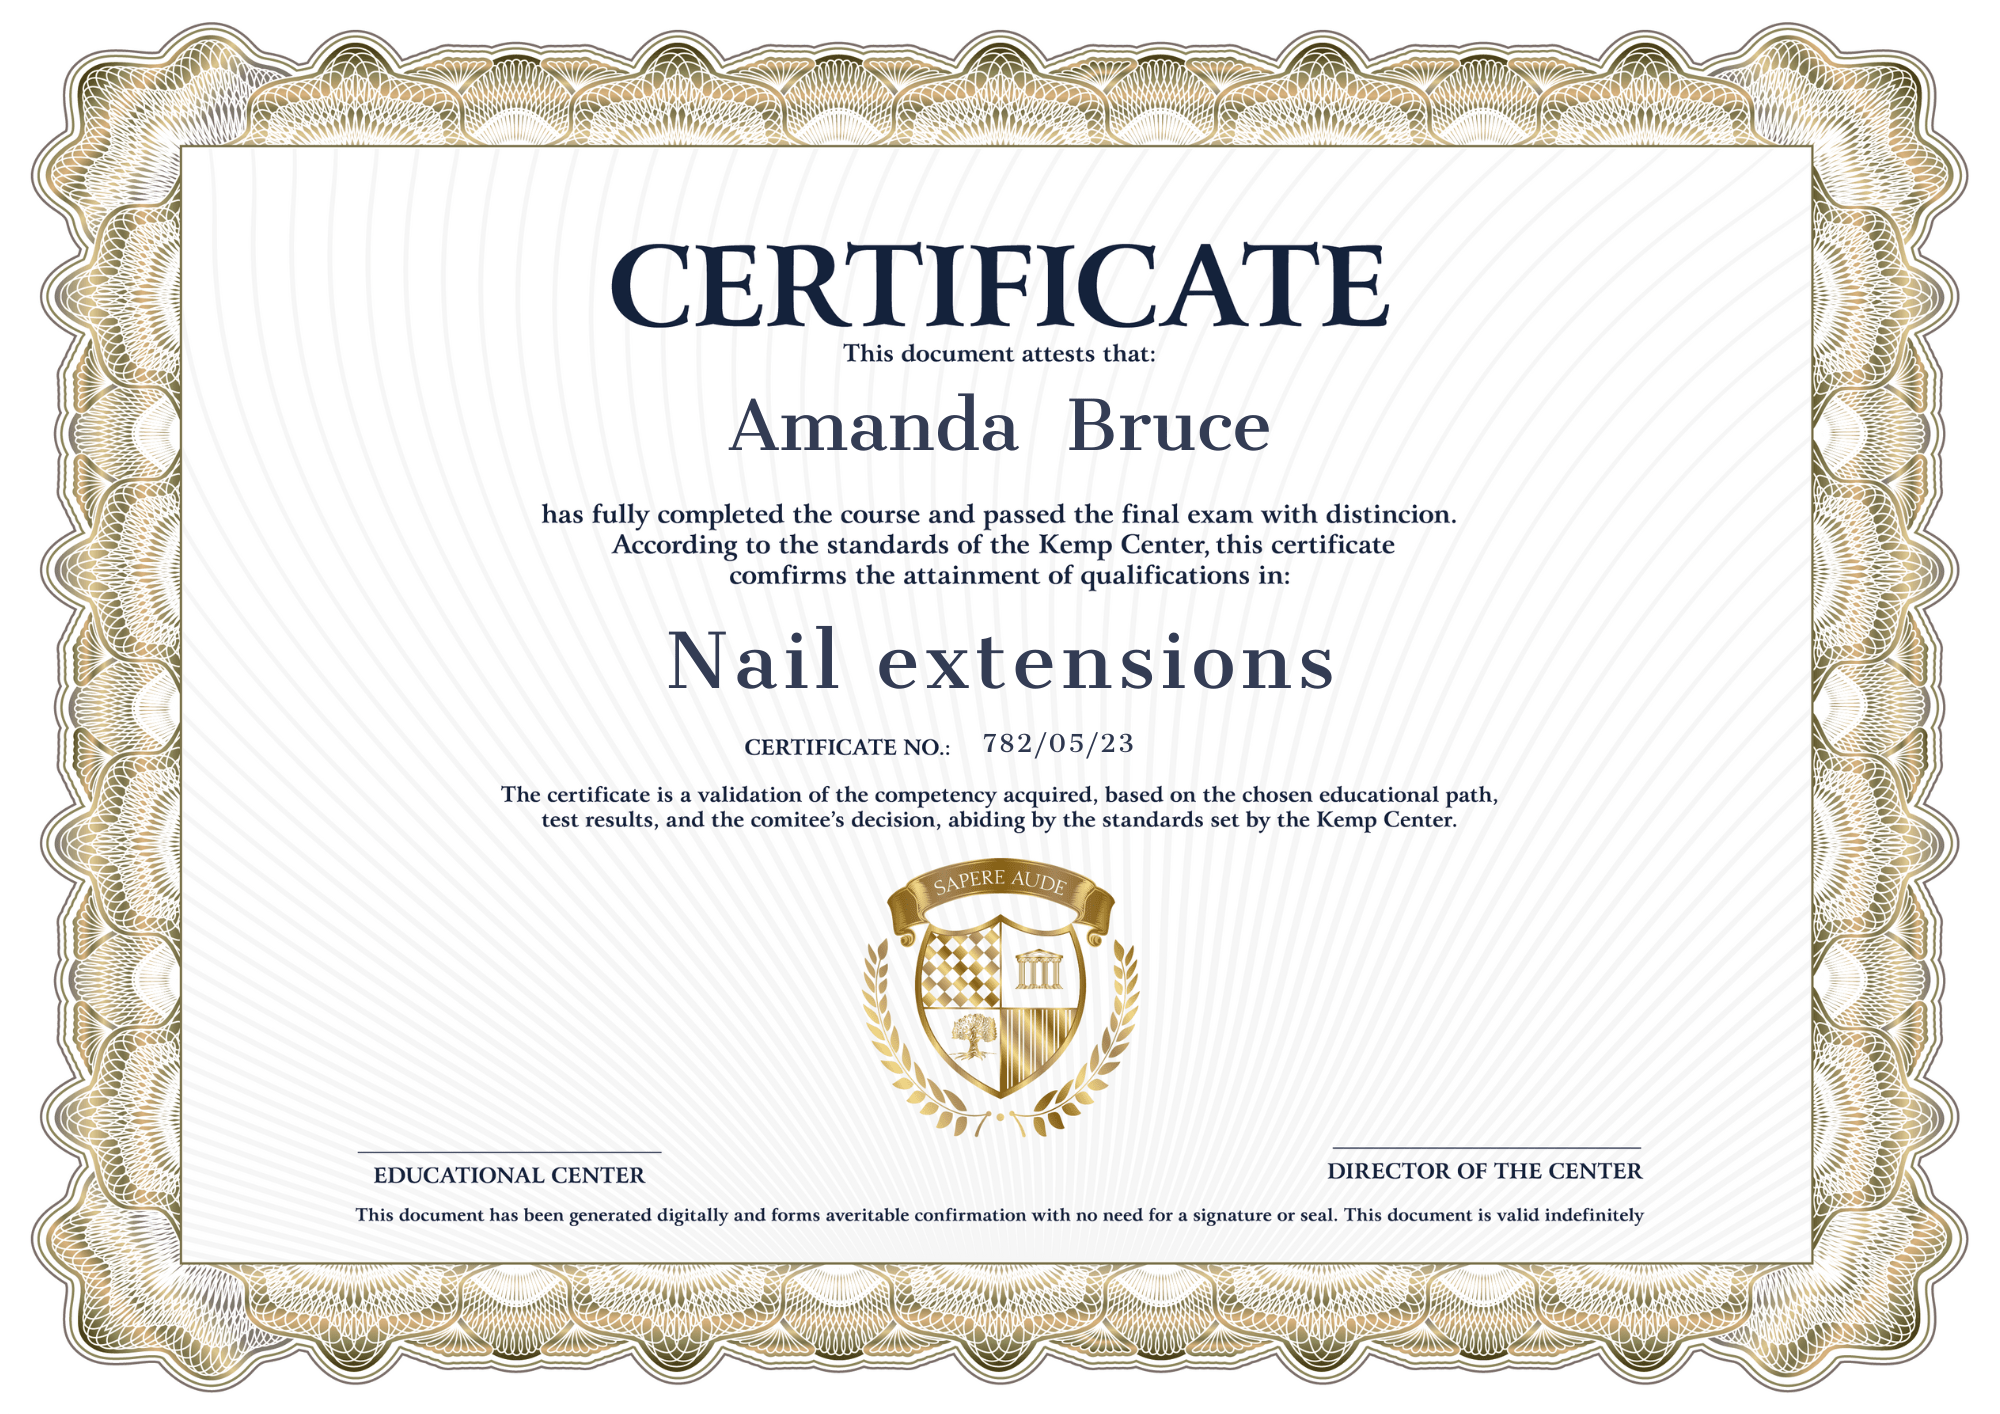 Certificate Nail extensions